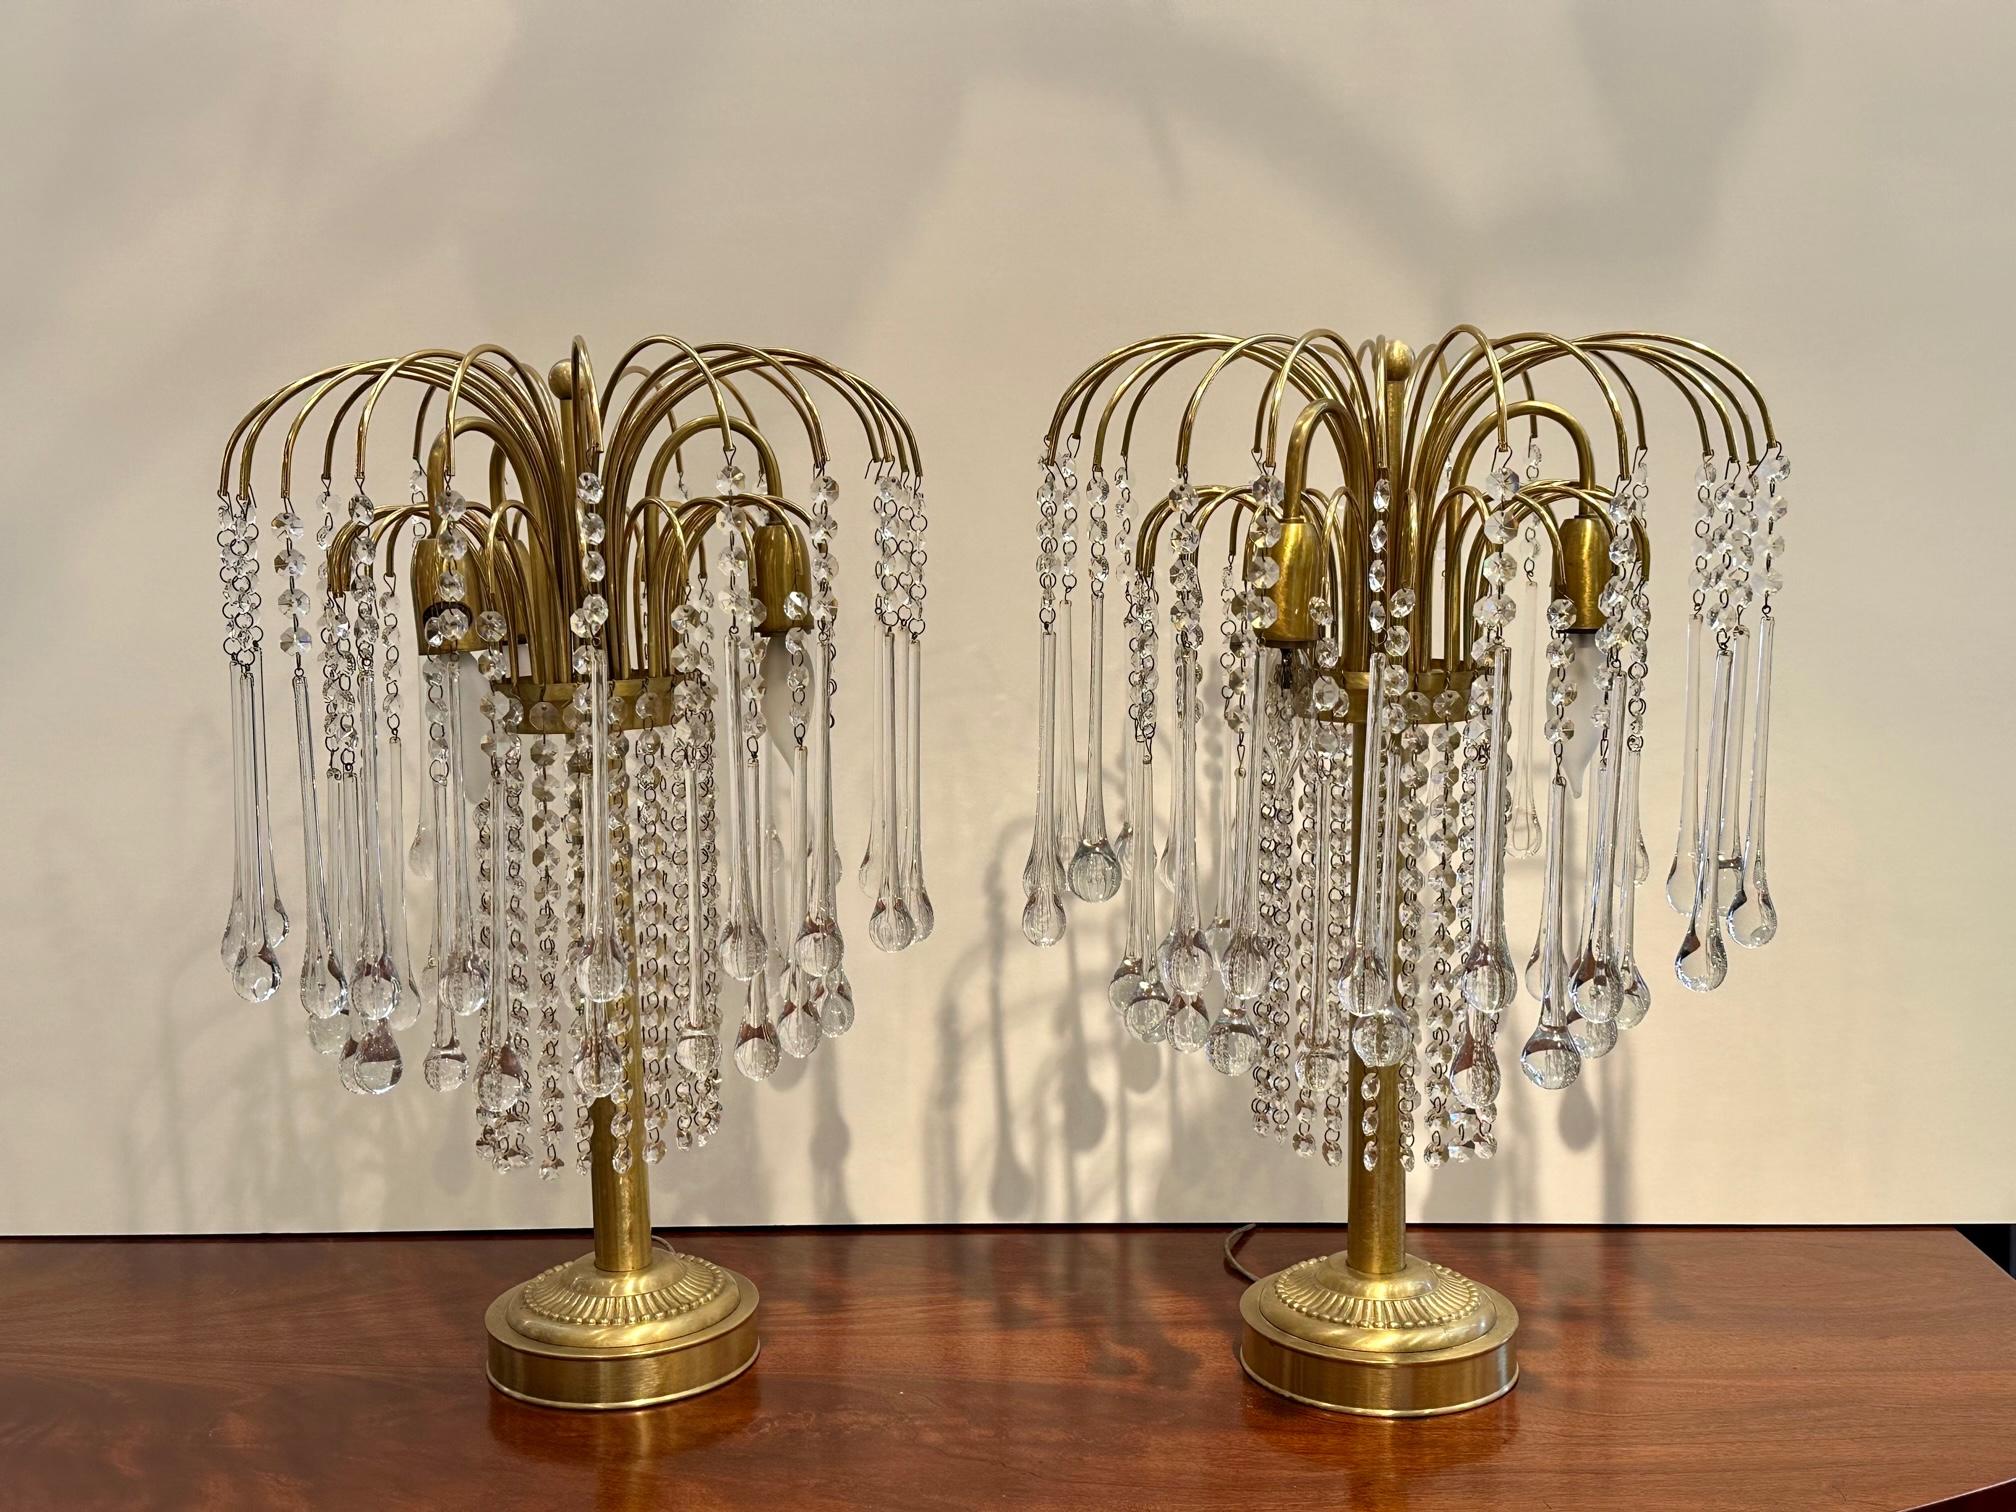 Fabulously glamorous decorative pair of Italian brass and crystal table lamps having an overflowing cascade of tear drop crystals erupting from arc shaped bands of brass. 3 lights per lamp.